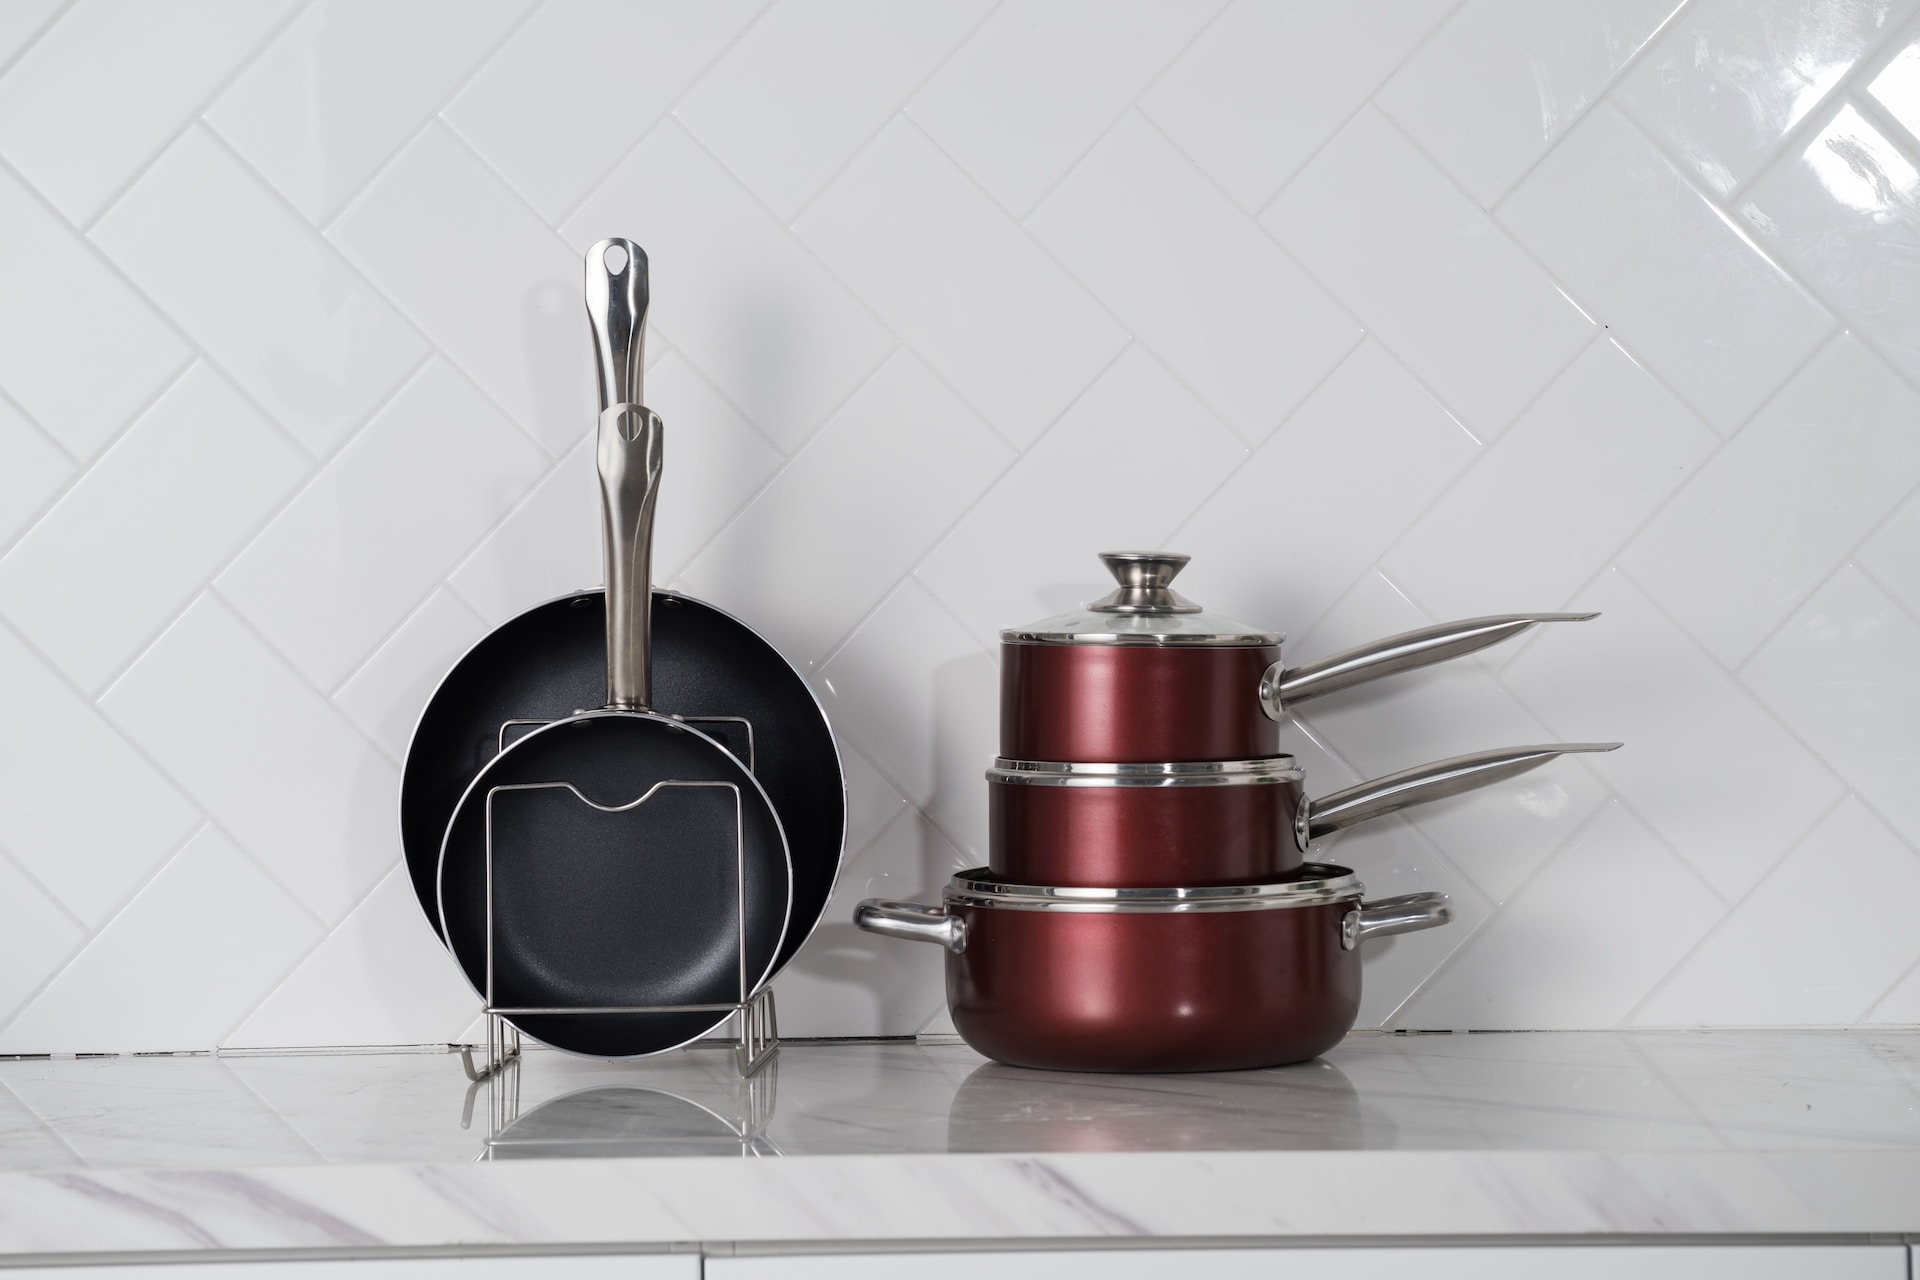 https://easylivingmom.com/wp-content/uploads/2020/03/Is-Magnalite-Cookware-Safe-to-Use.jpg